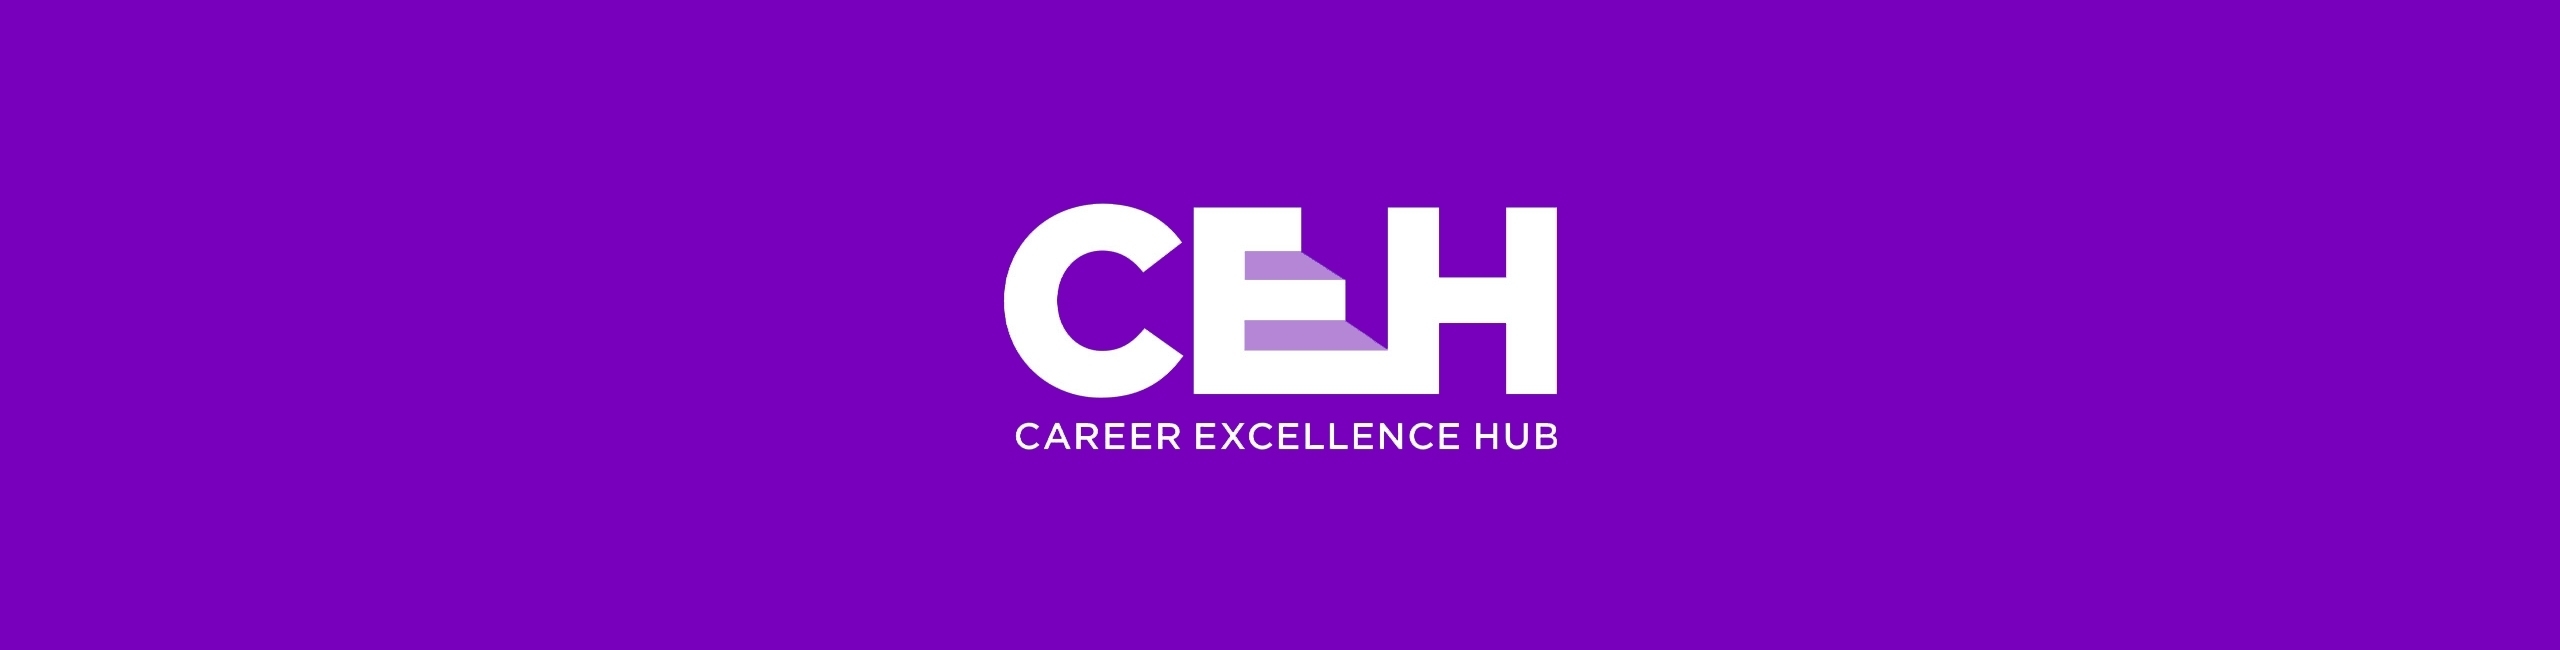 Career Excellence Hub, CEH, Future Talent Business Partner